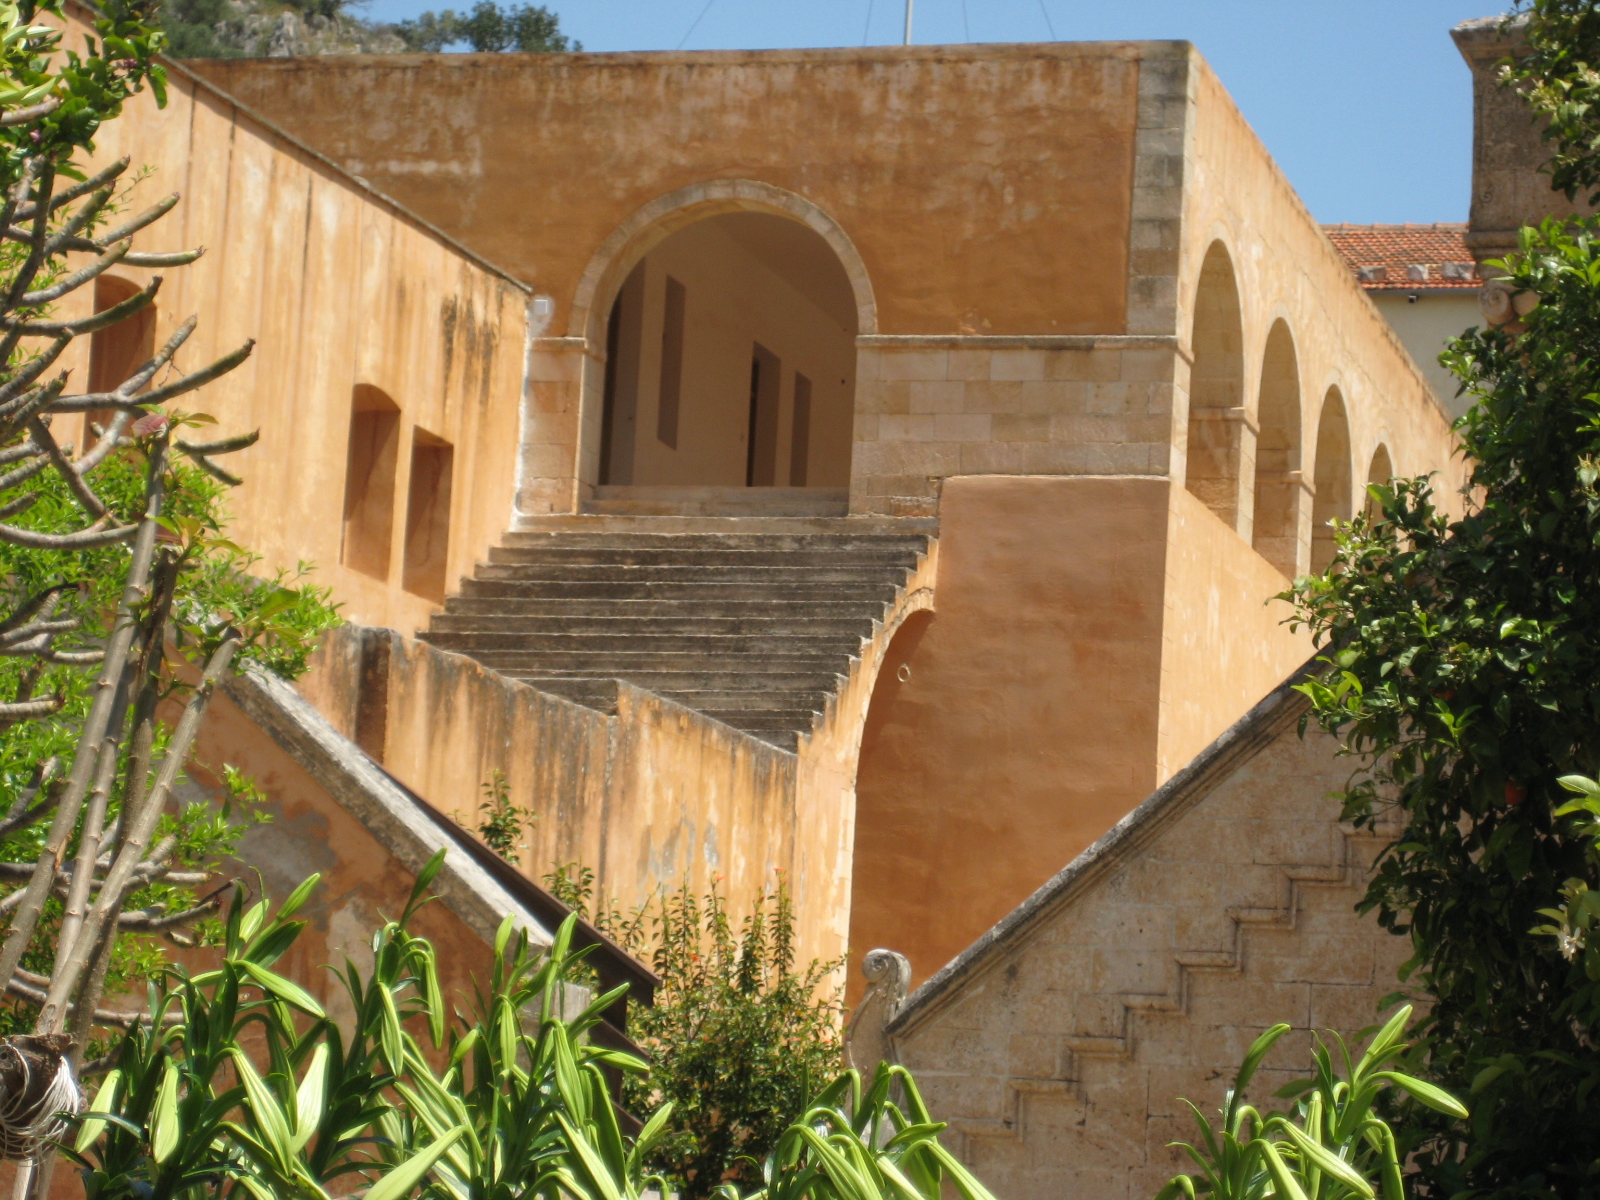 stairs leading to several arched arches and windows